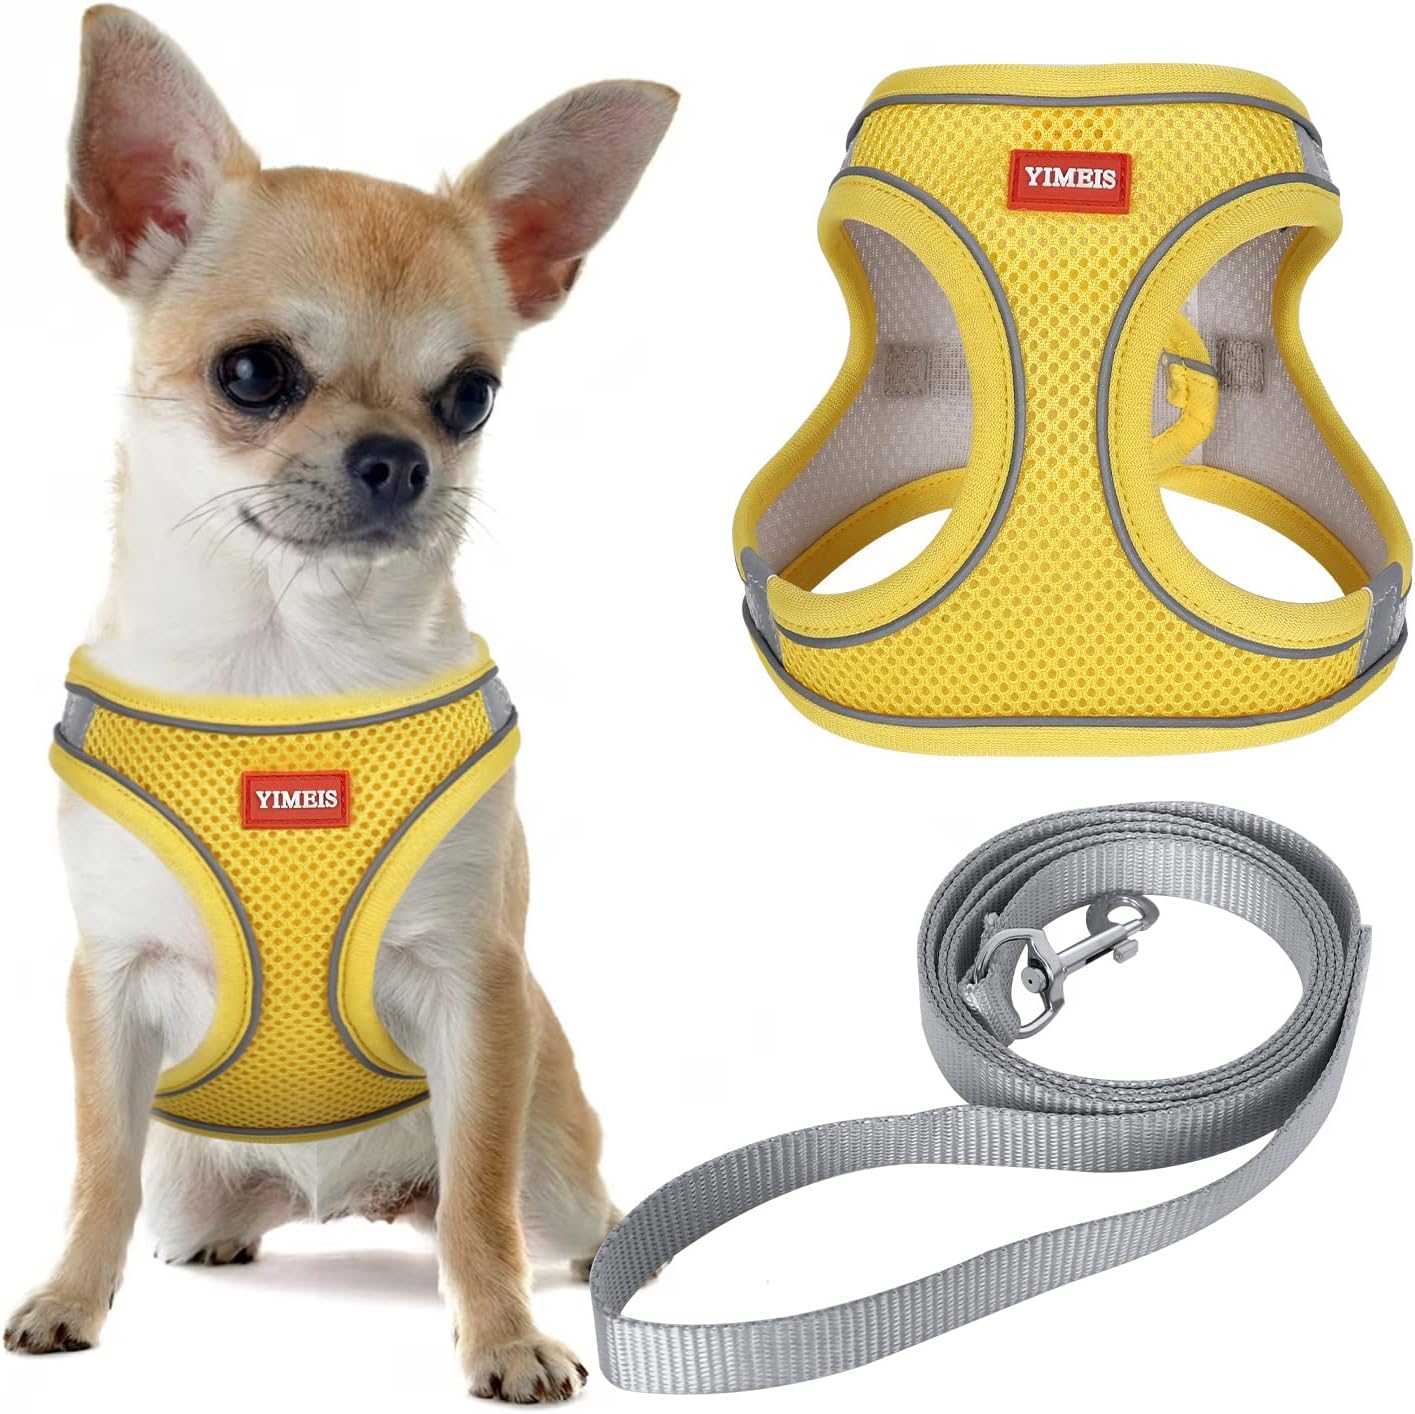 YIMEIS Dog Harness and Leash Set, No Pull Soft Mesh Pet Harness, Reflective Adjustable Puppy Vest for Small Medium Large Dogs, Cats (Yellowgrey, Medium (Pack of 1)